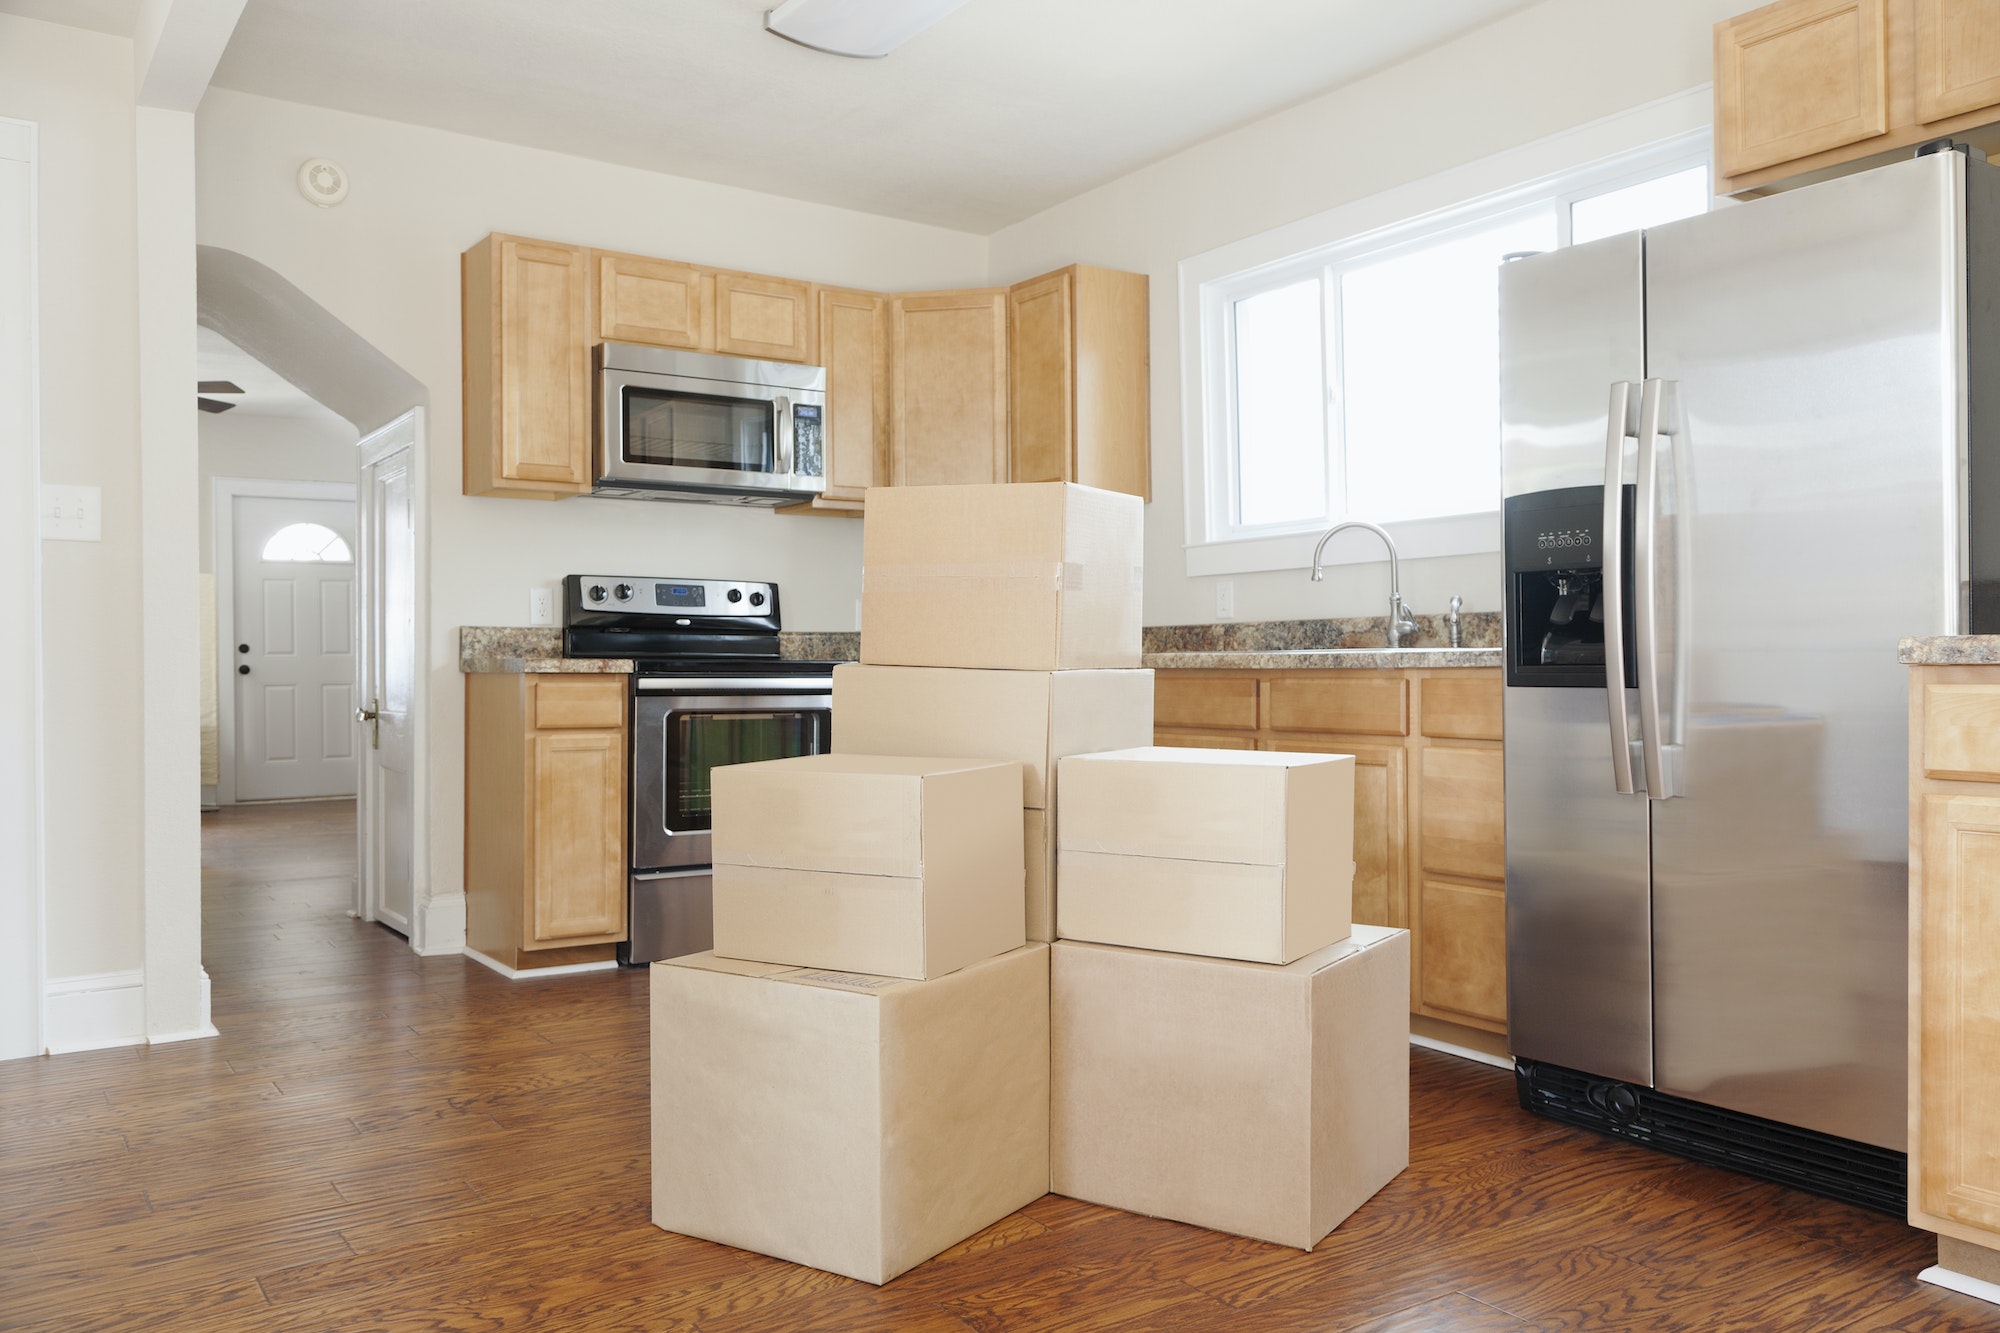 Moving house, relocation, cardboard boxes piled up in a house fitted kitchen